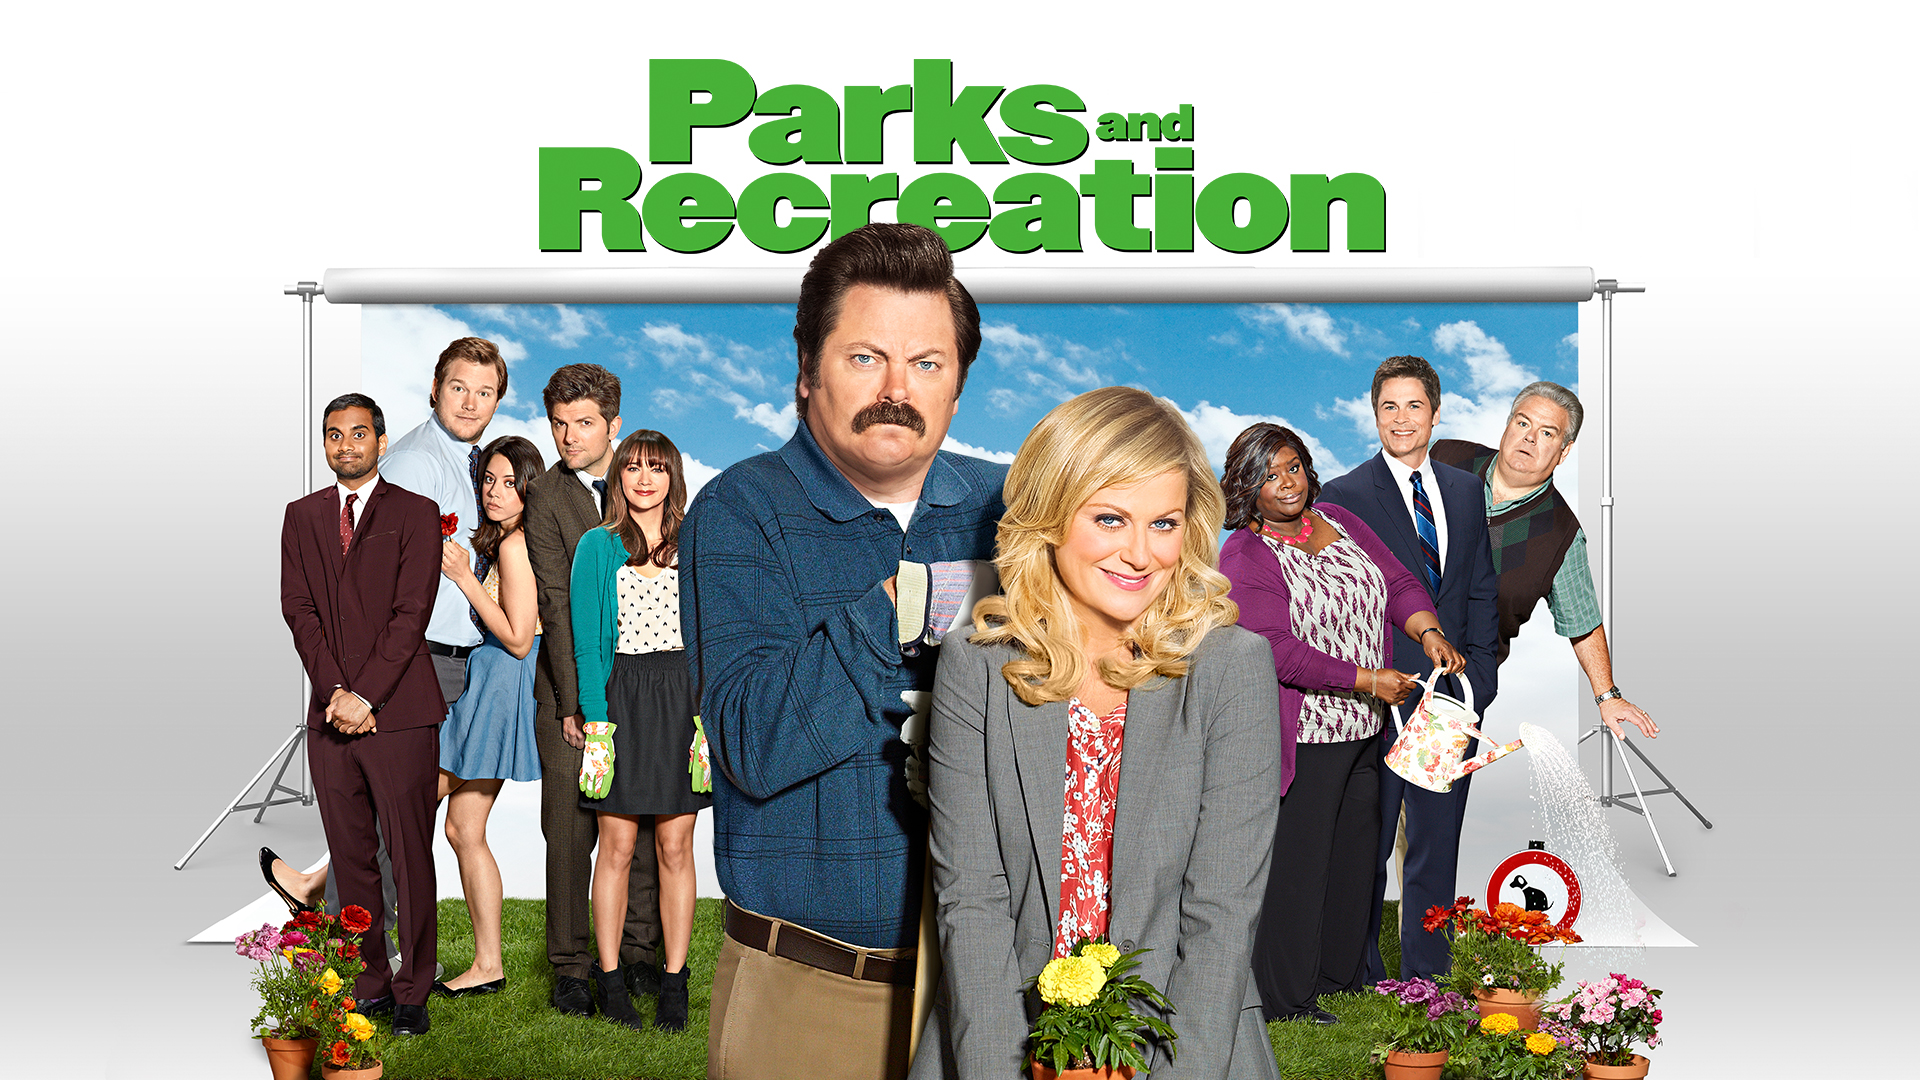 Geek insider, geekinsider, geekinsider. Com,, bye bye old parks and recreation, you're 5,000 candles in the wind, entertainment